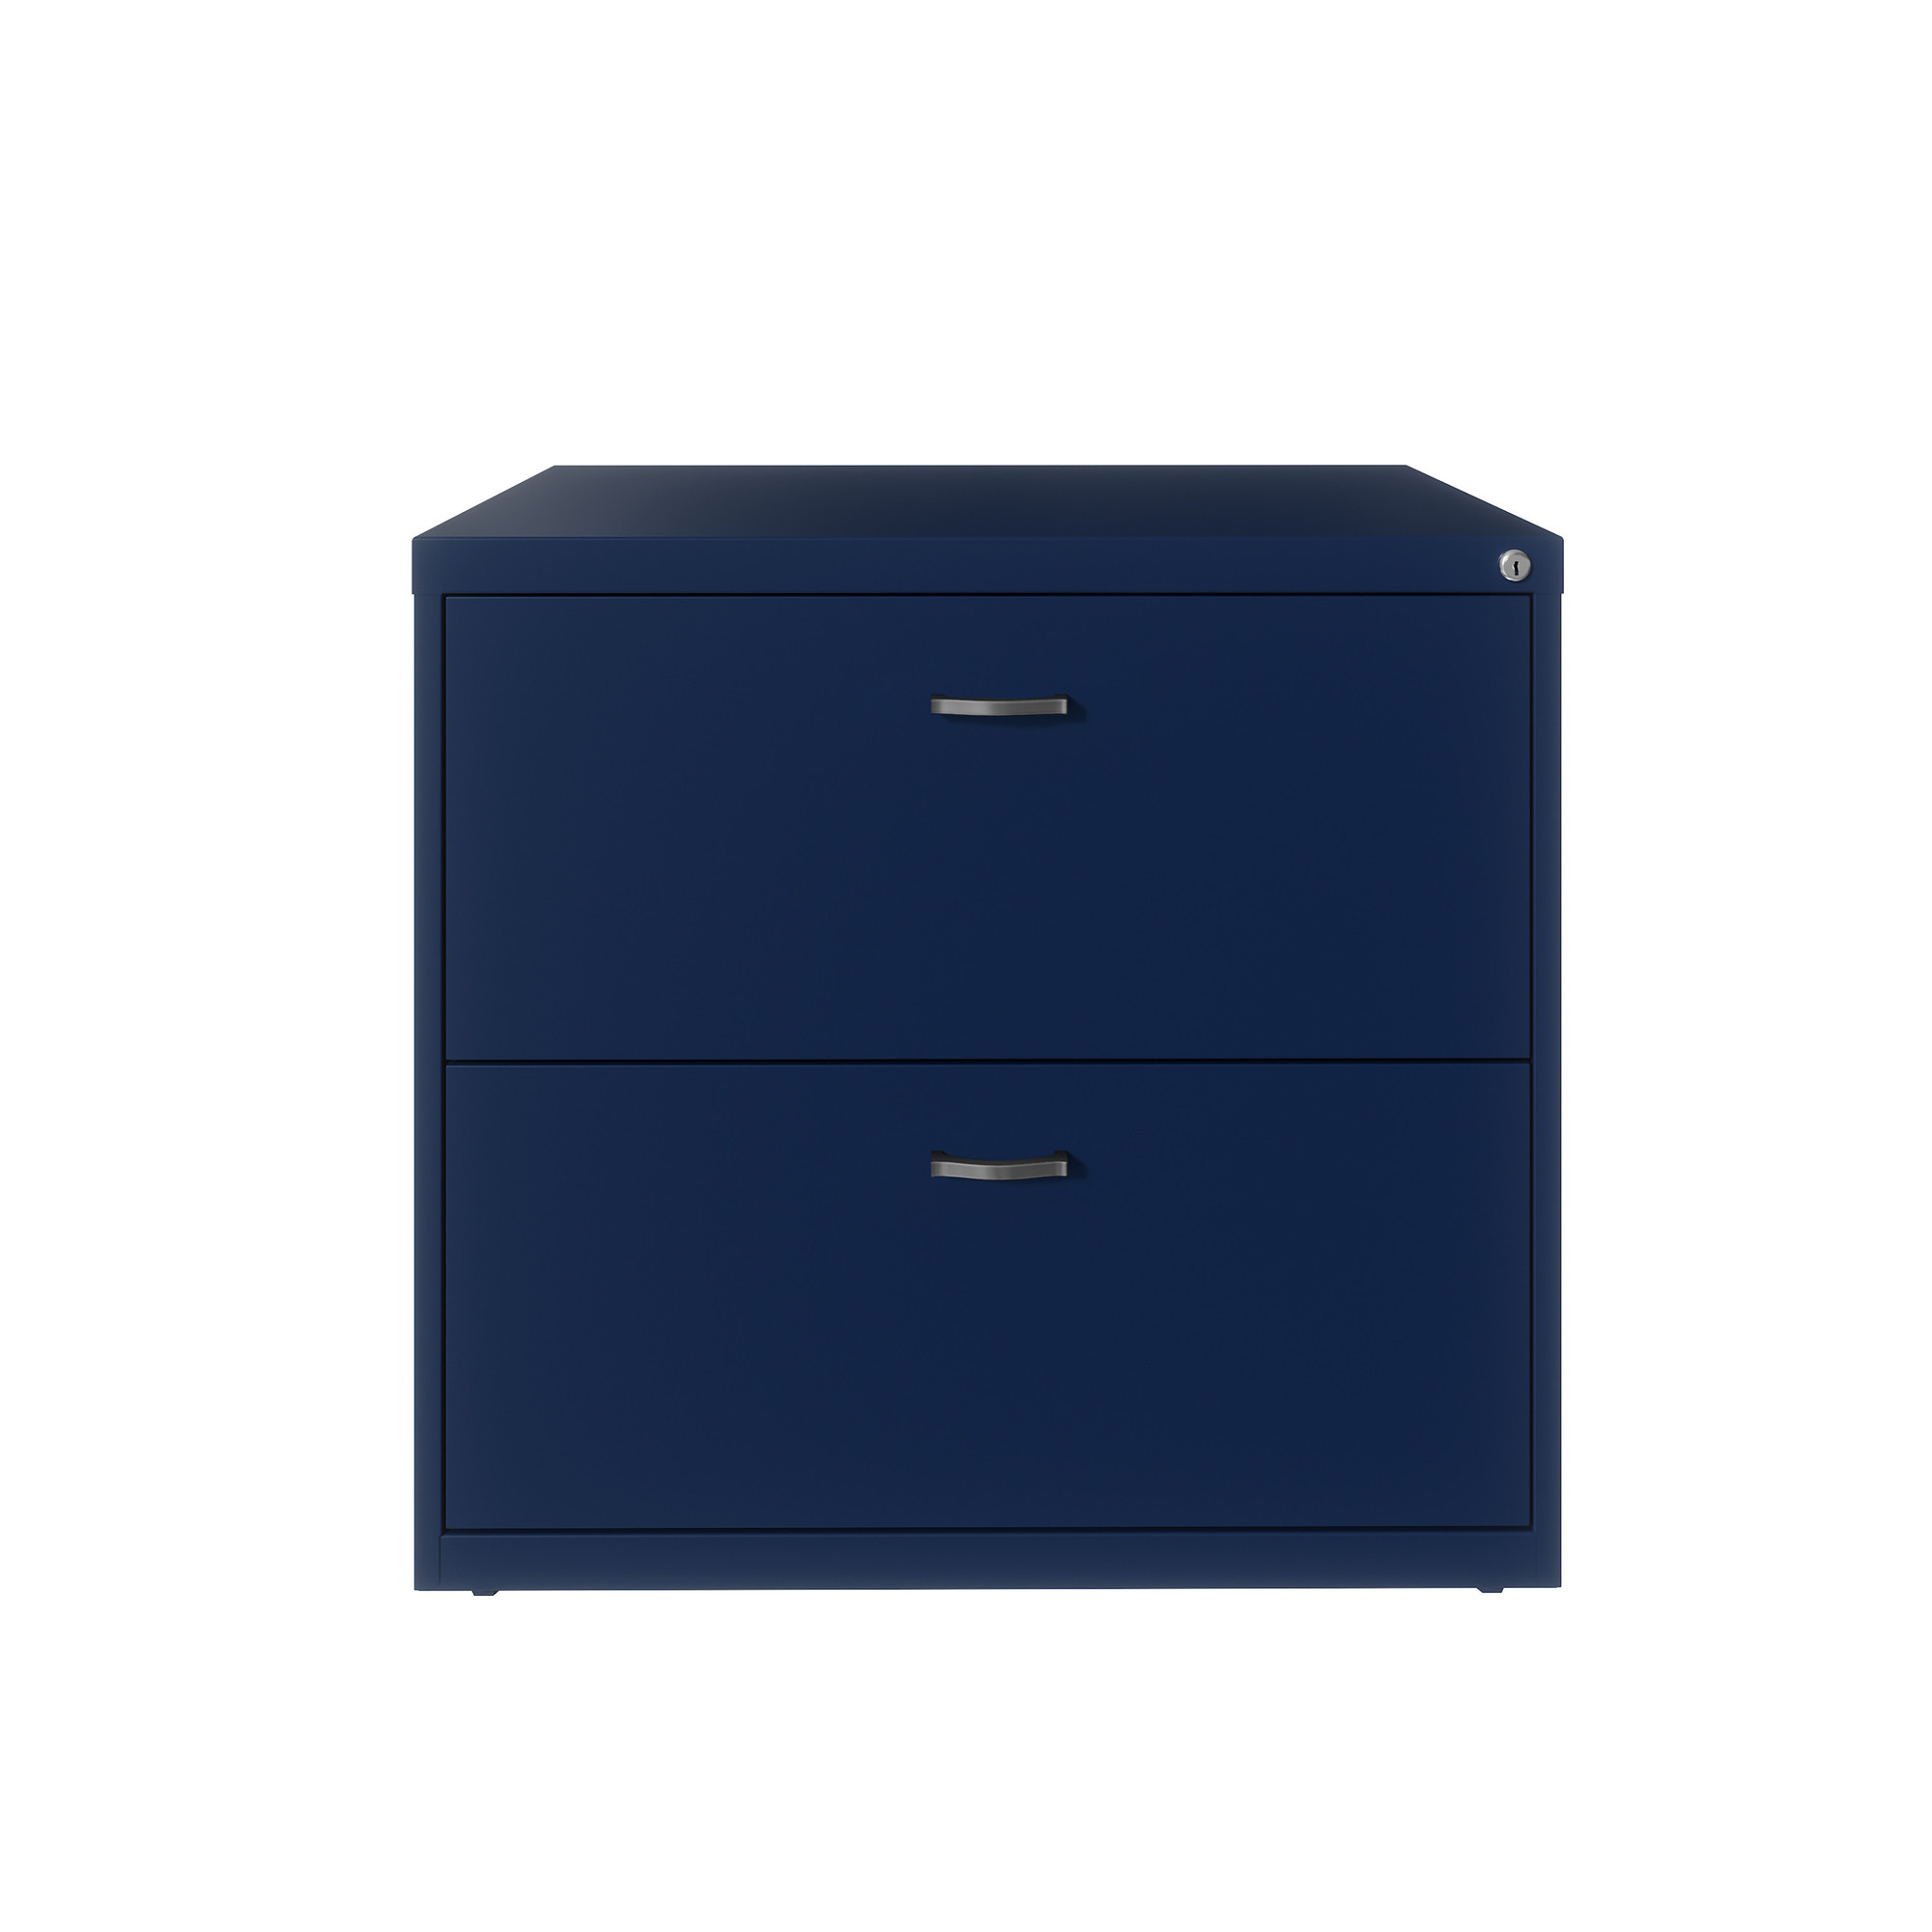 Hirsh Industries, 2 Drawer Lateral File Cabinet, Width 30 in, Depth 17.63 in, Height 27.75 in, Model 24080